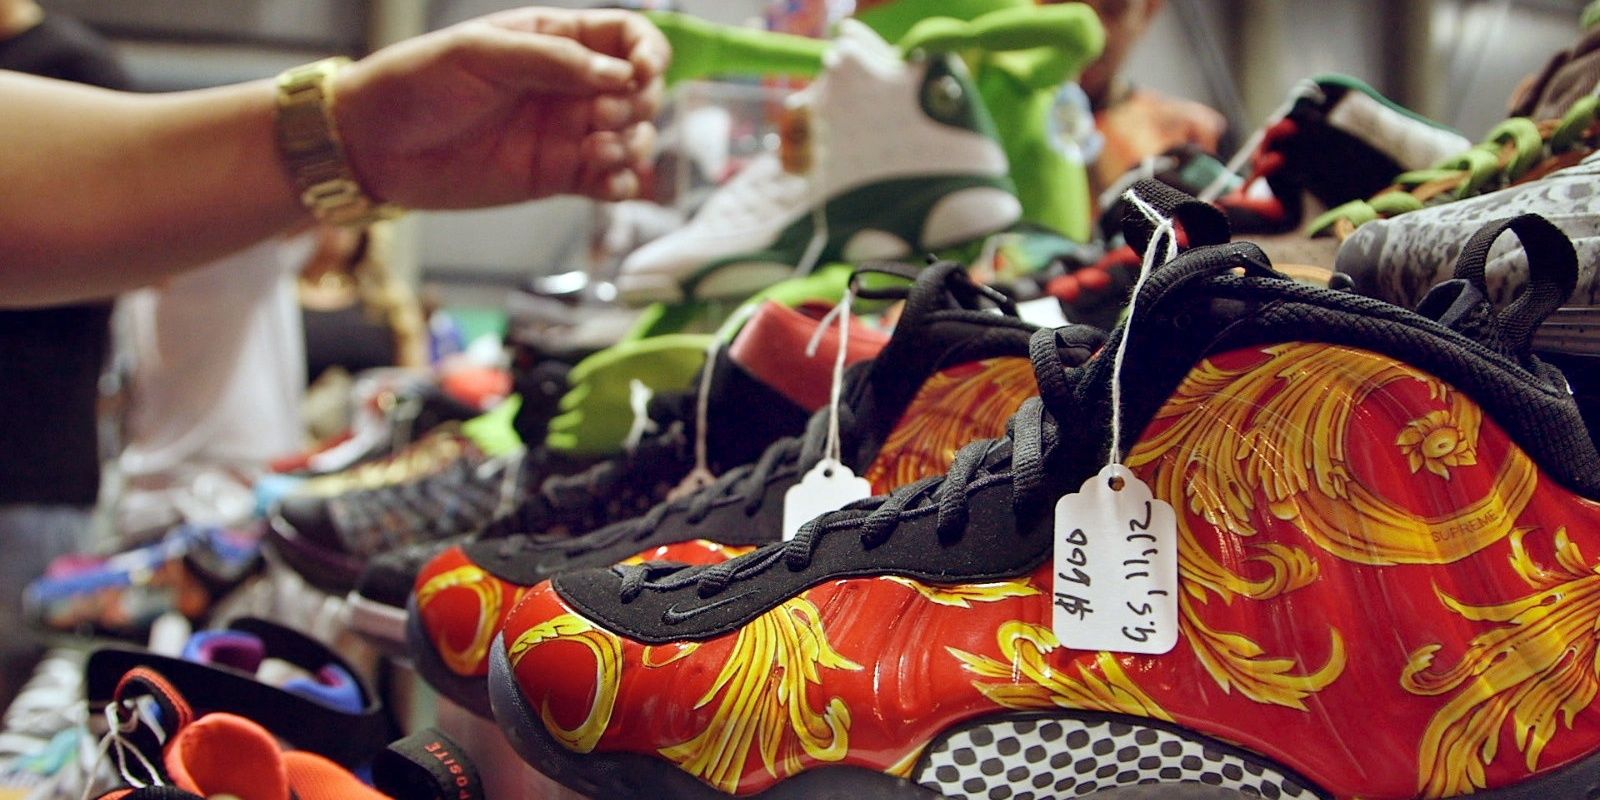 Shoes in a still from Sneakerheadz